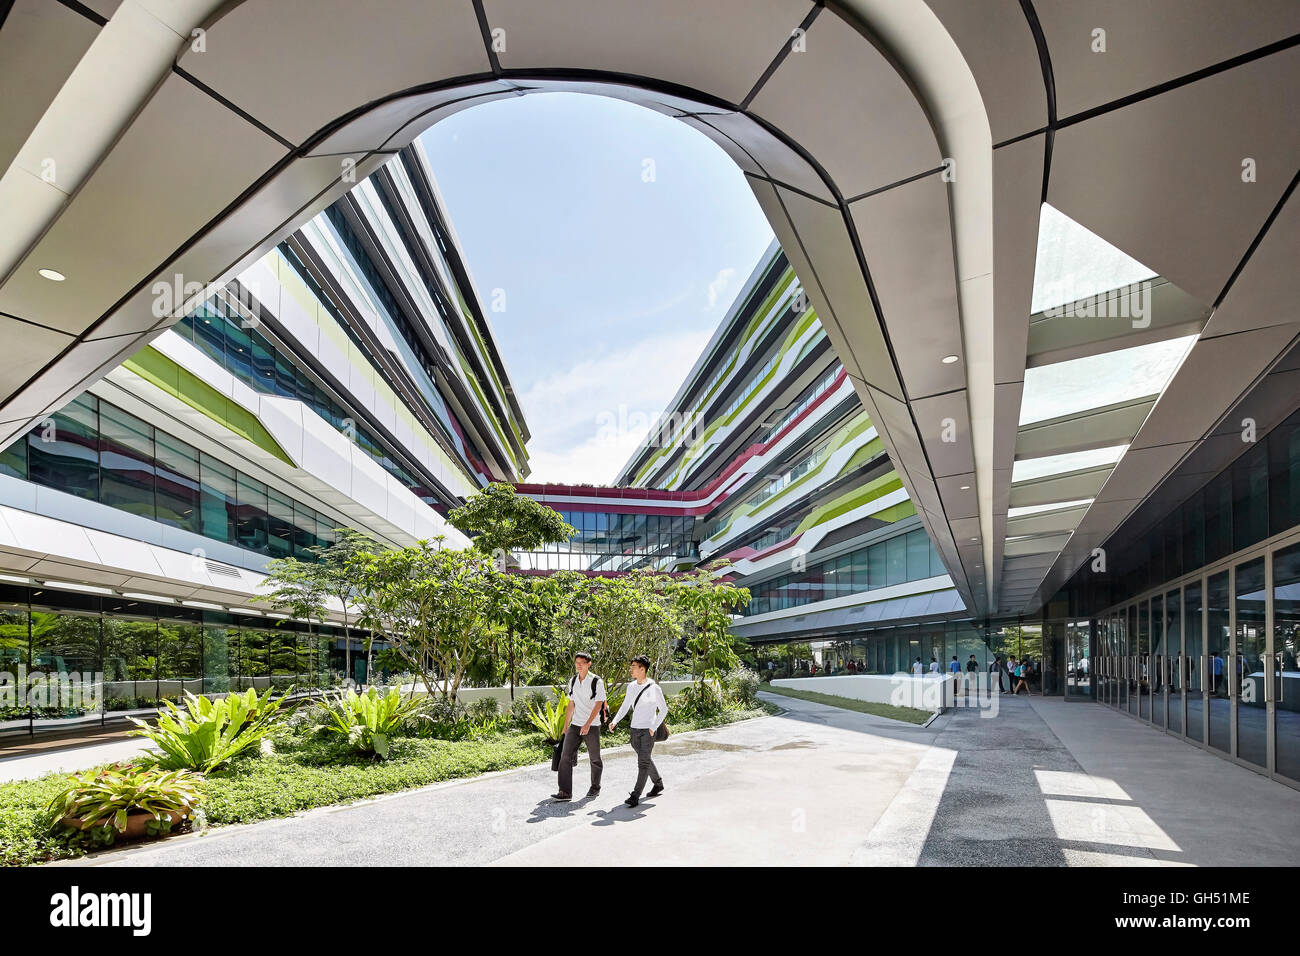 Open courtyard garden with walkways and curved building facades. Singapore University of Technology and Design, Singapore, Singapore. Architect: UNStudio, 2015. Stock Photo